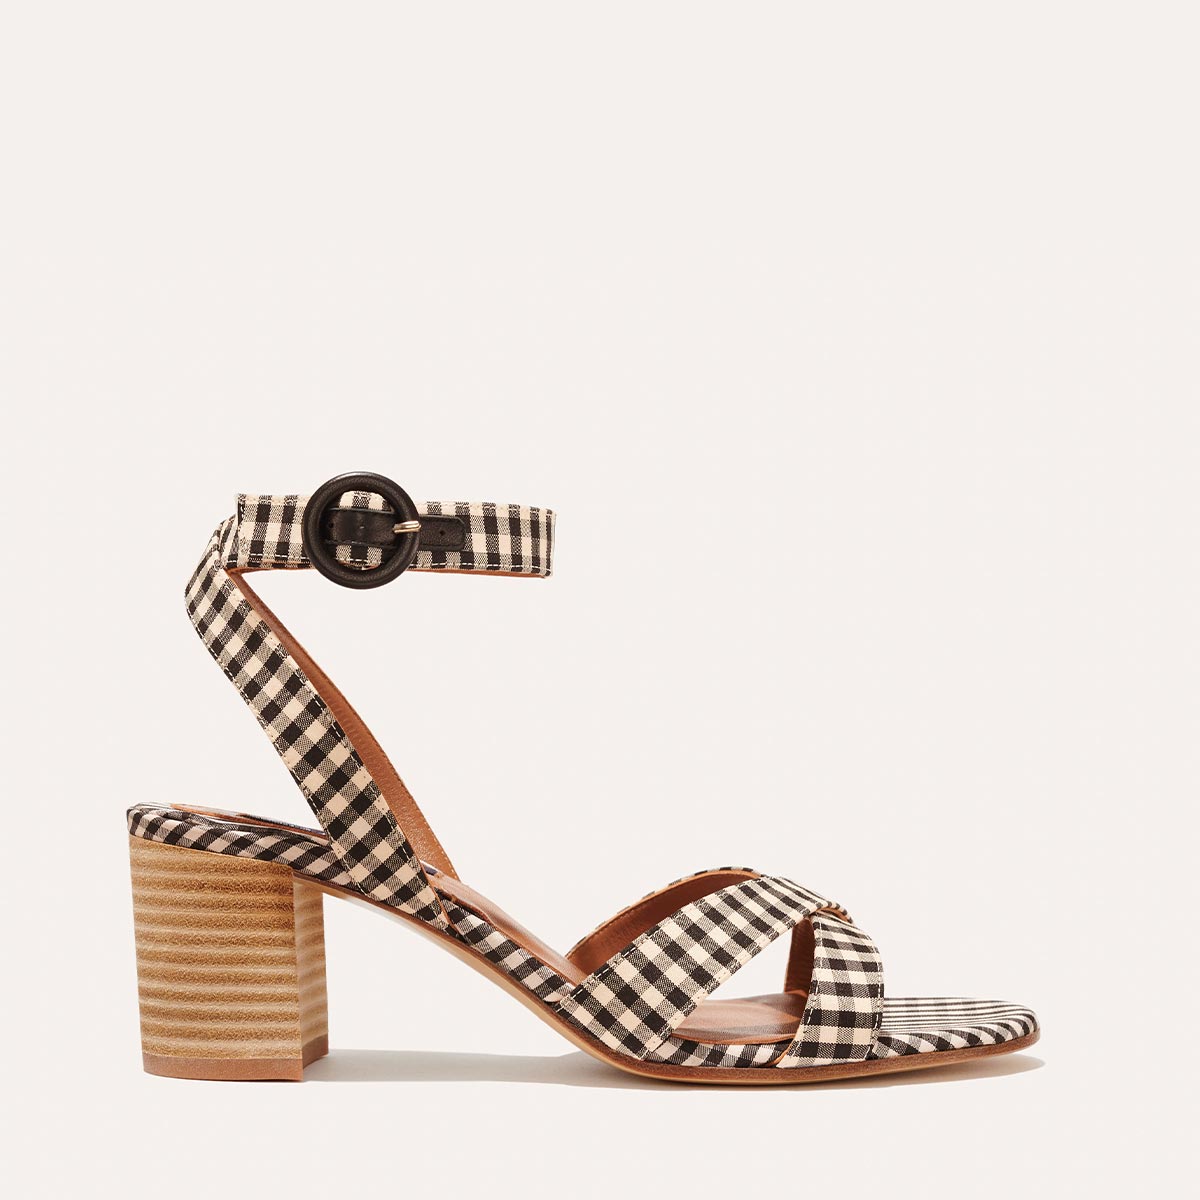 Margaux's classic City Sandal in tan and black gingham fabric with comfortable straps and a walkable block heel